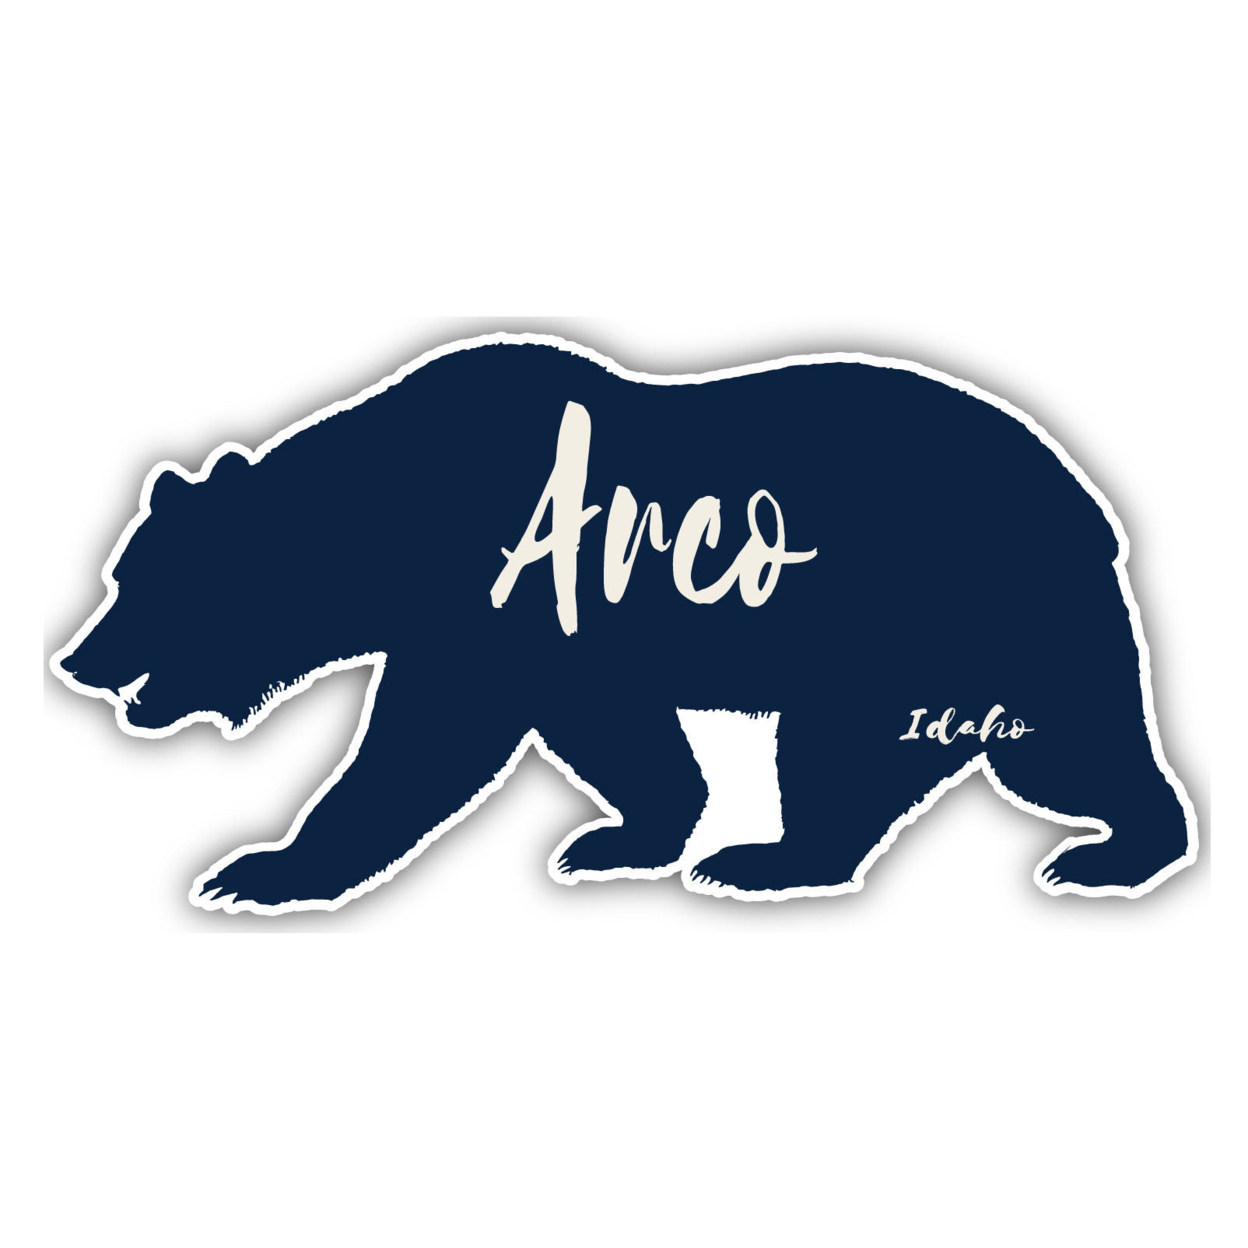 Arco Idaho Souvenir Decorative Stickers (Choose Theme And Size) - 4-Pack, 12-Inch, Bear